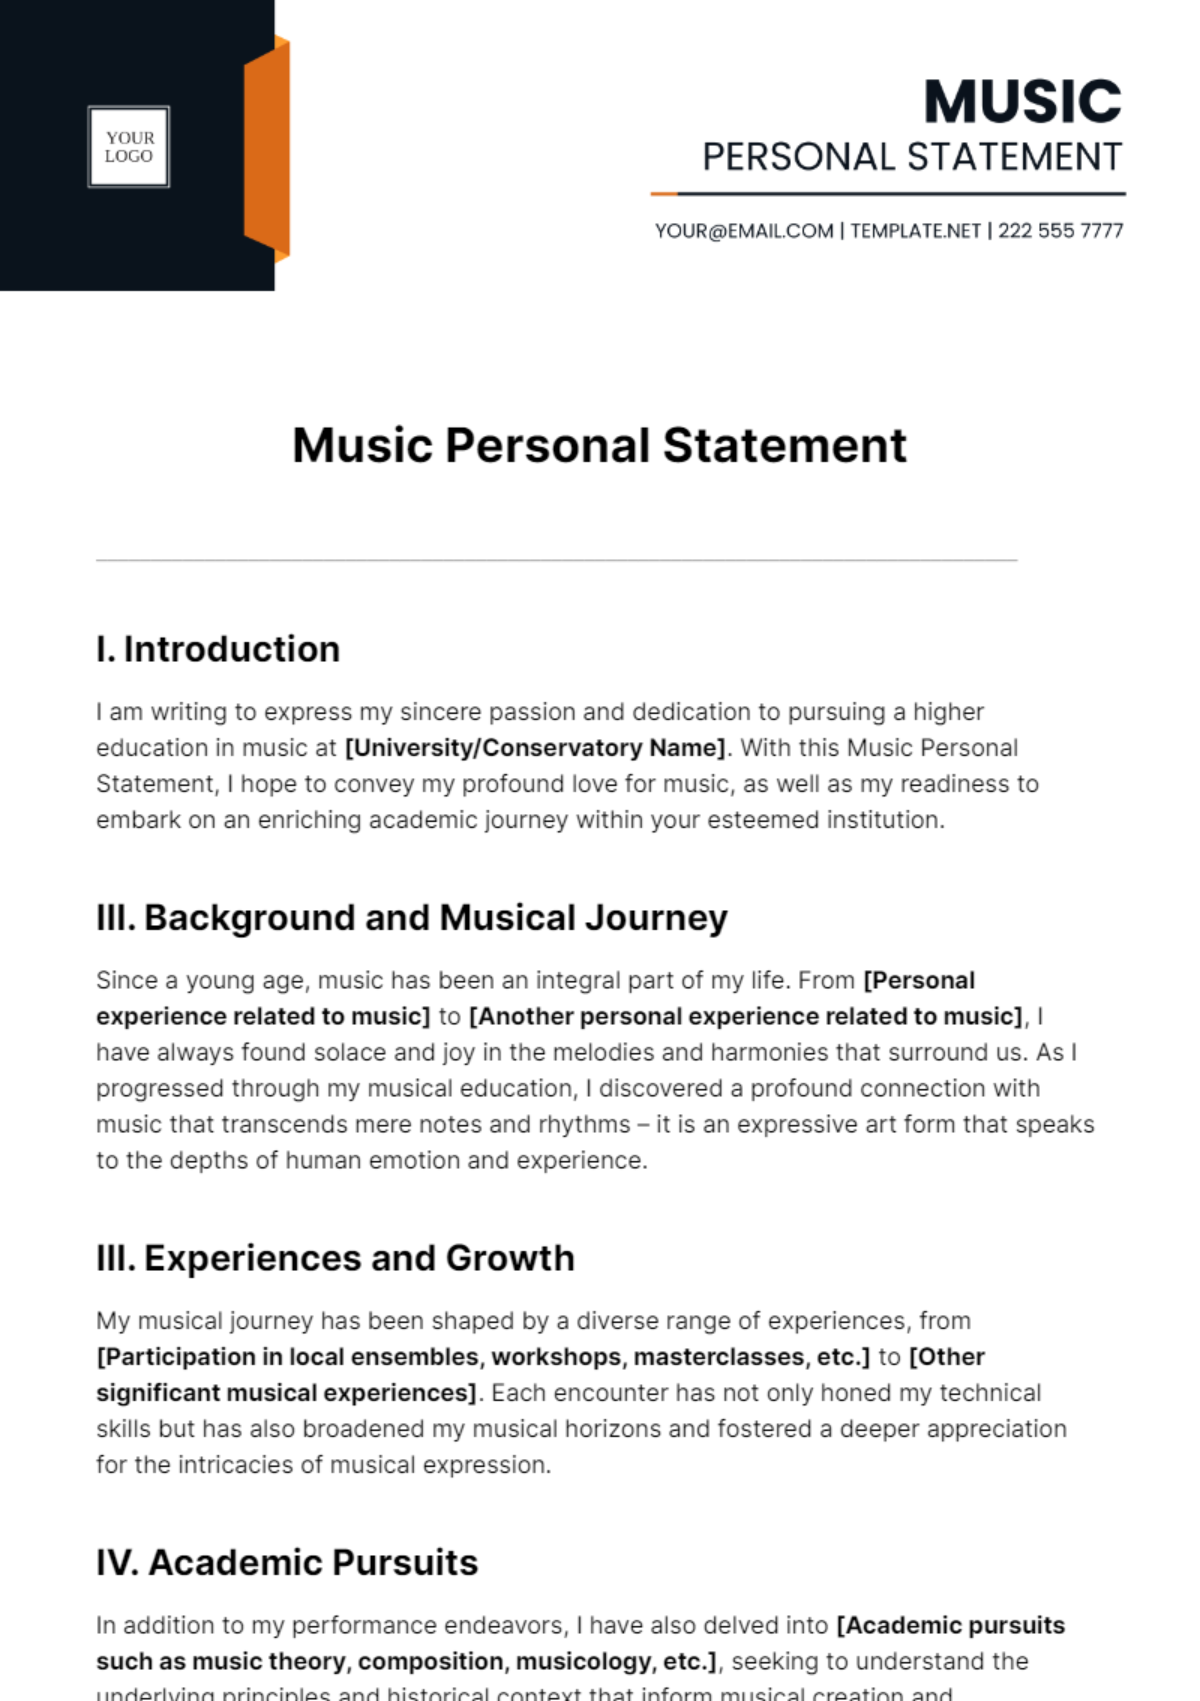 Music Personal Statement Template